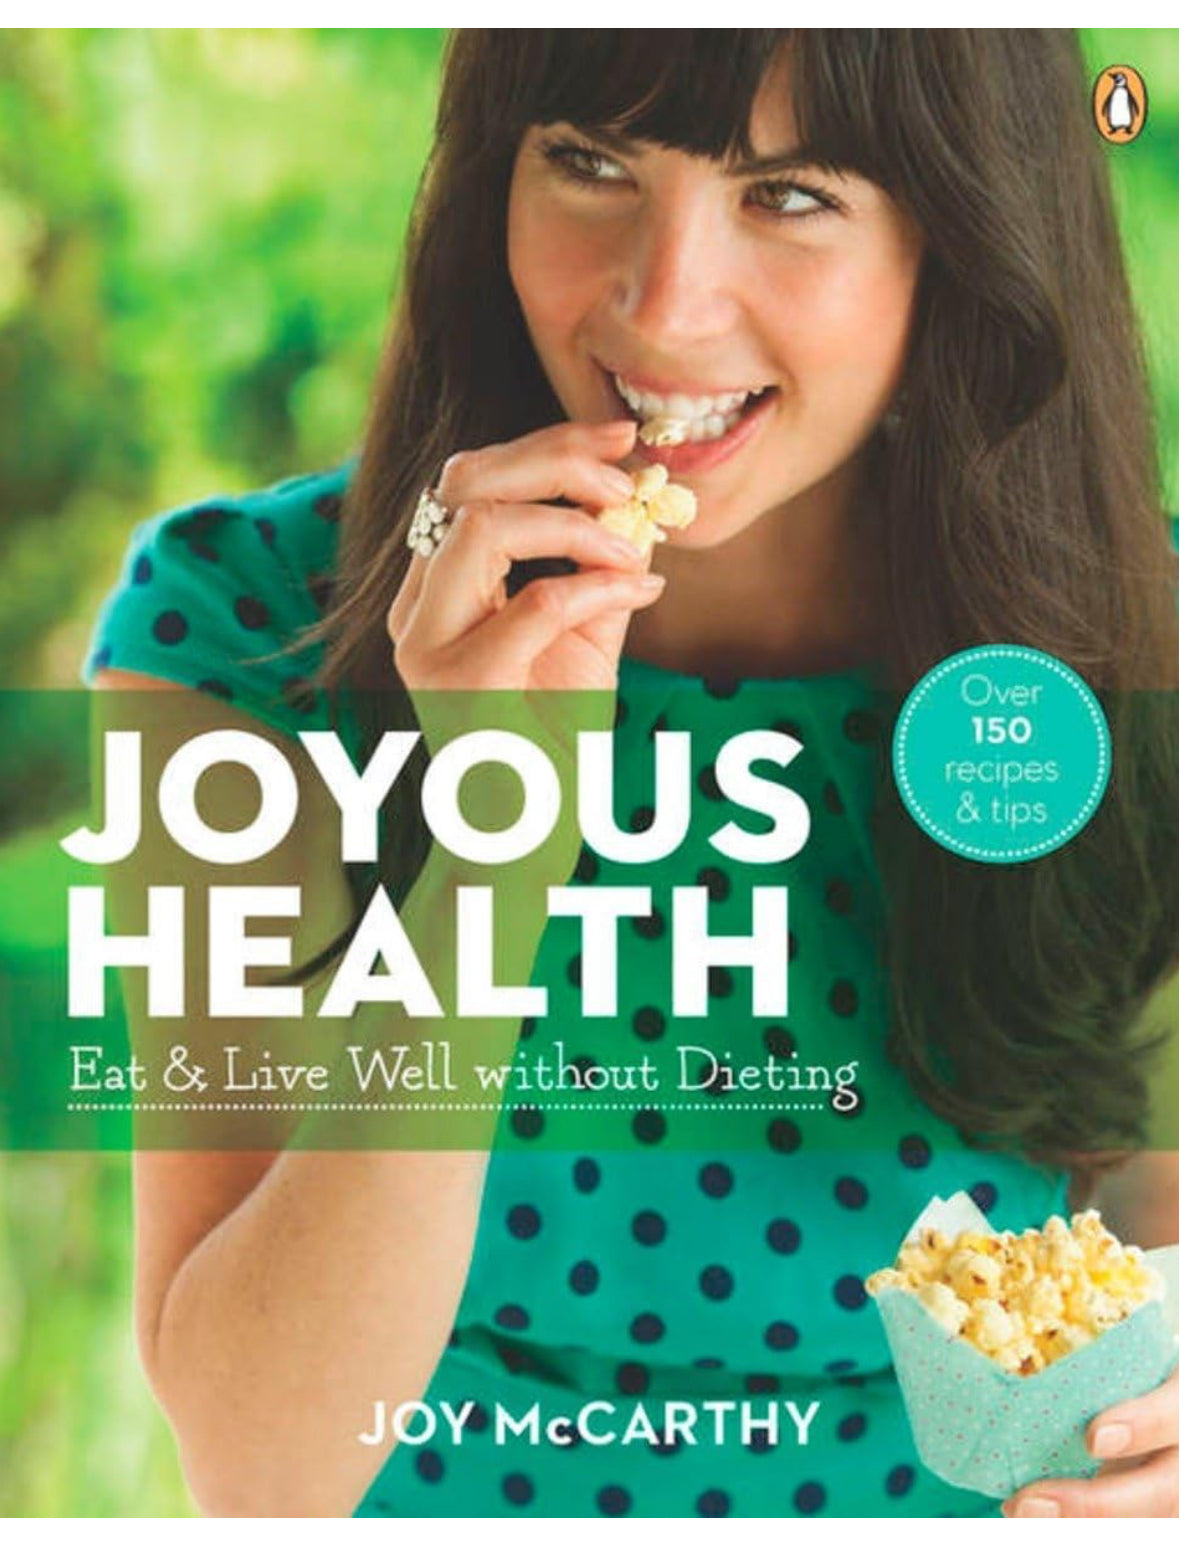 Joyous Health by Joy McCarthy: Eat & Live Well Without Dieting